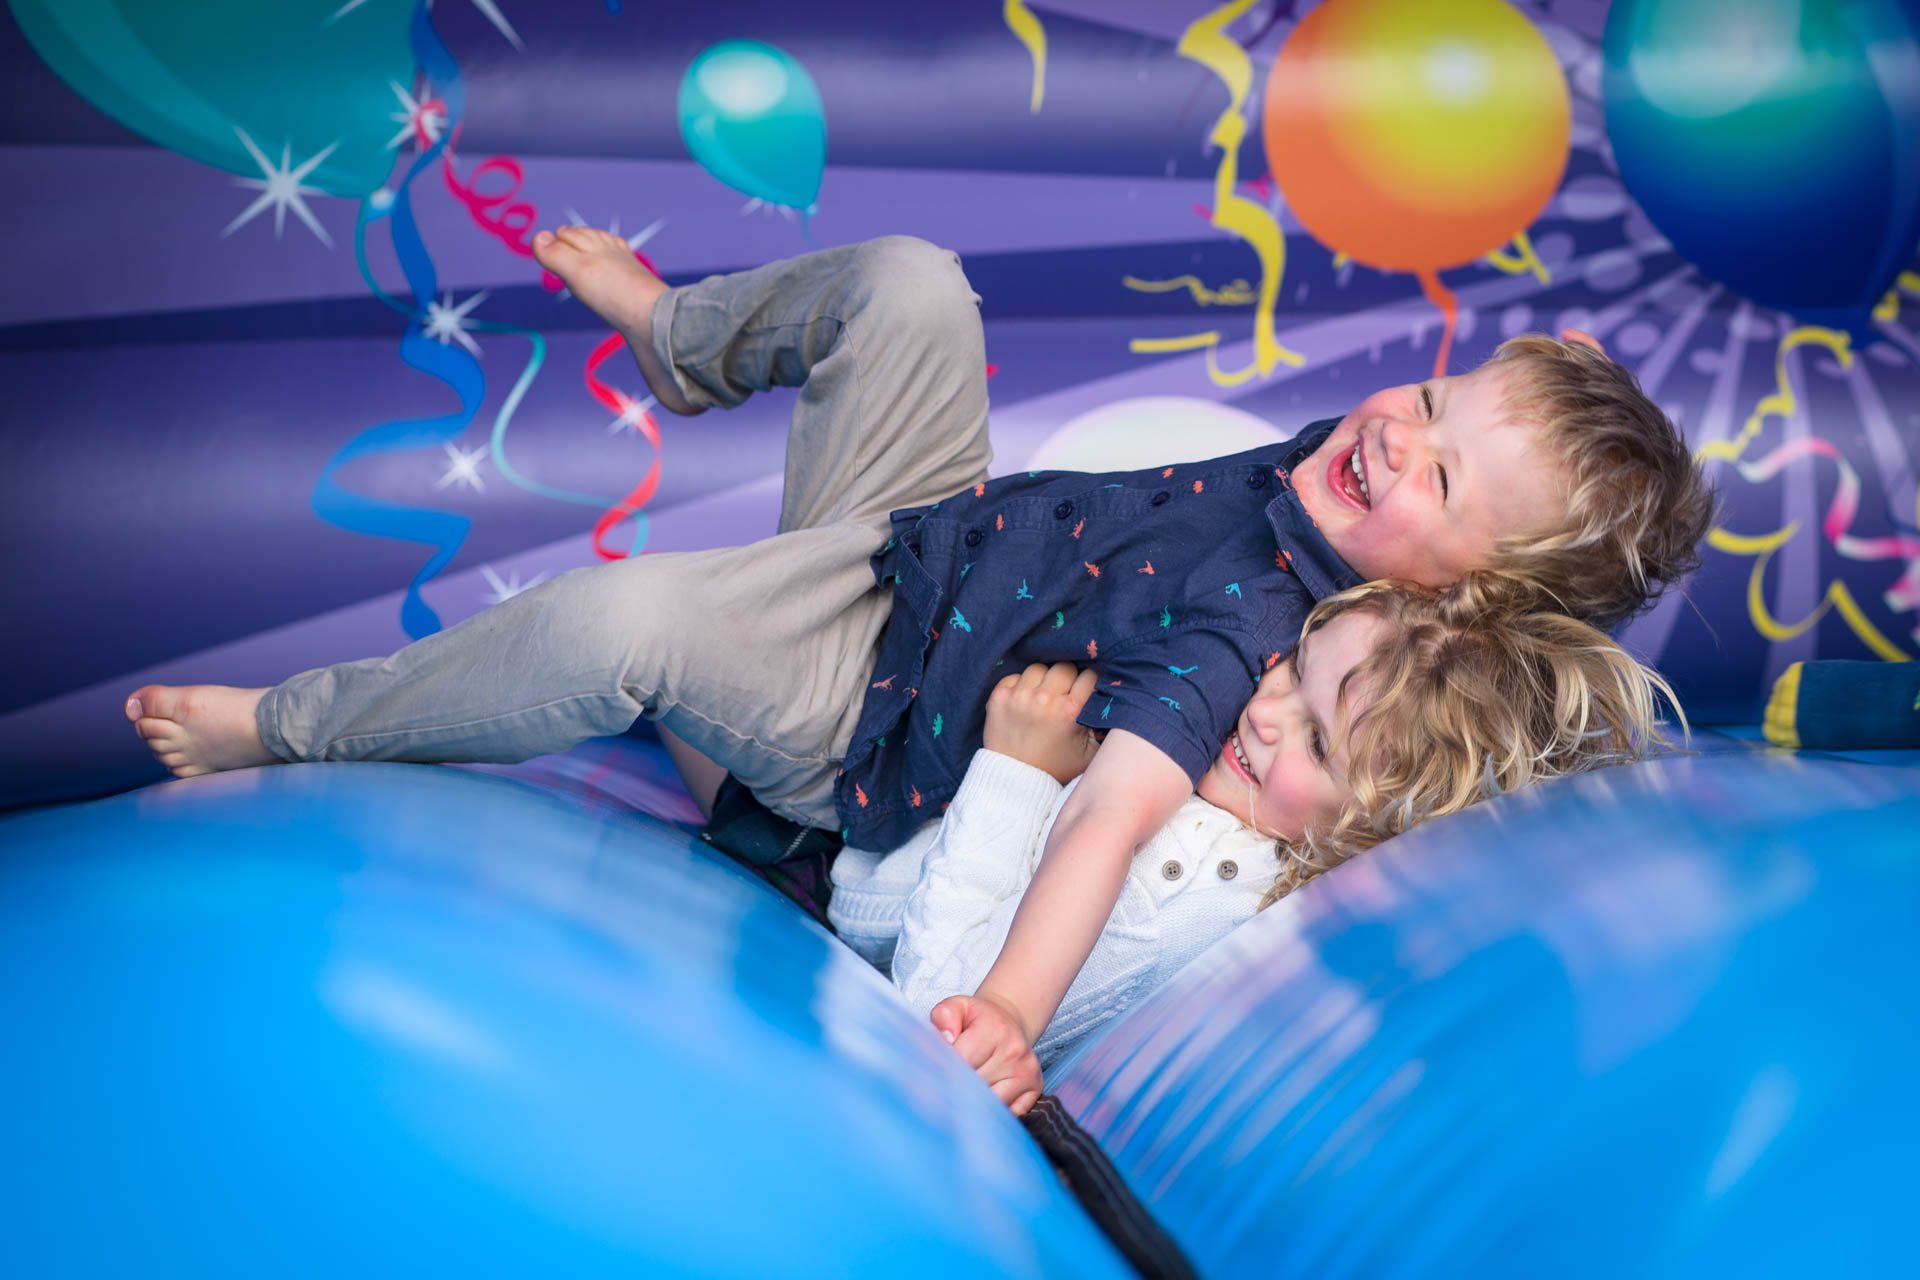 Bouncy castle for wedding guests both old and young!